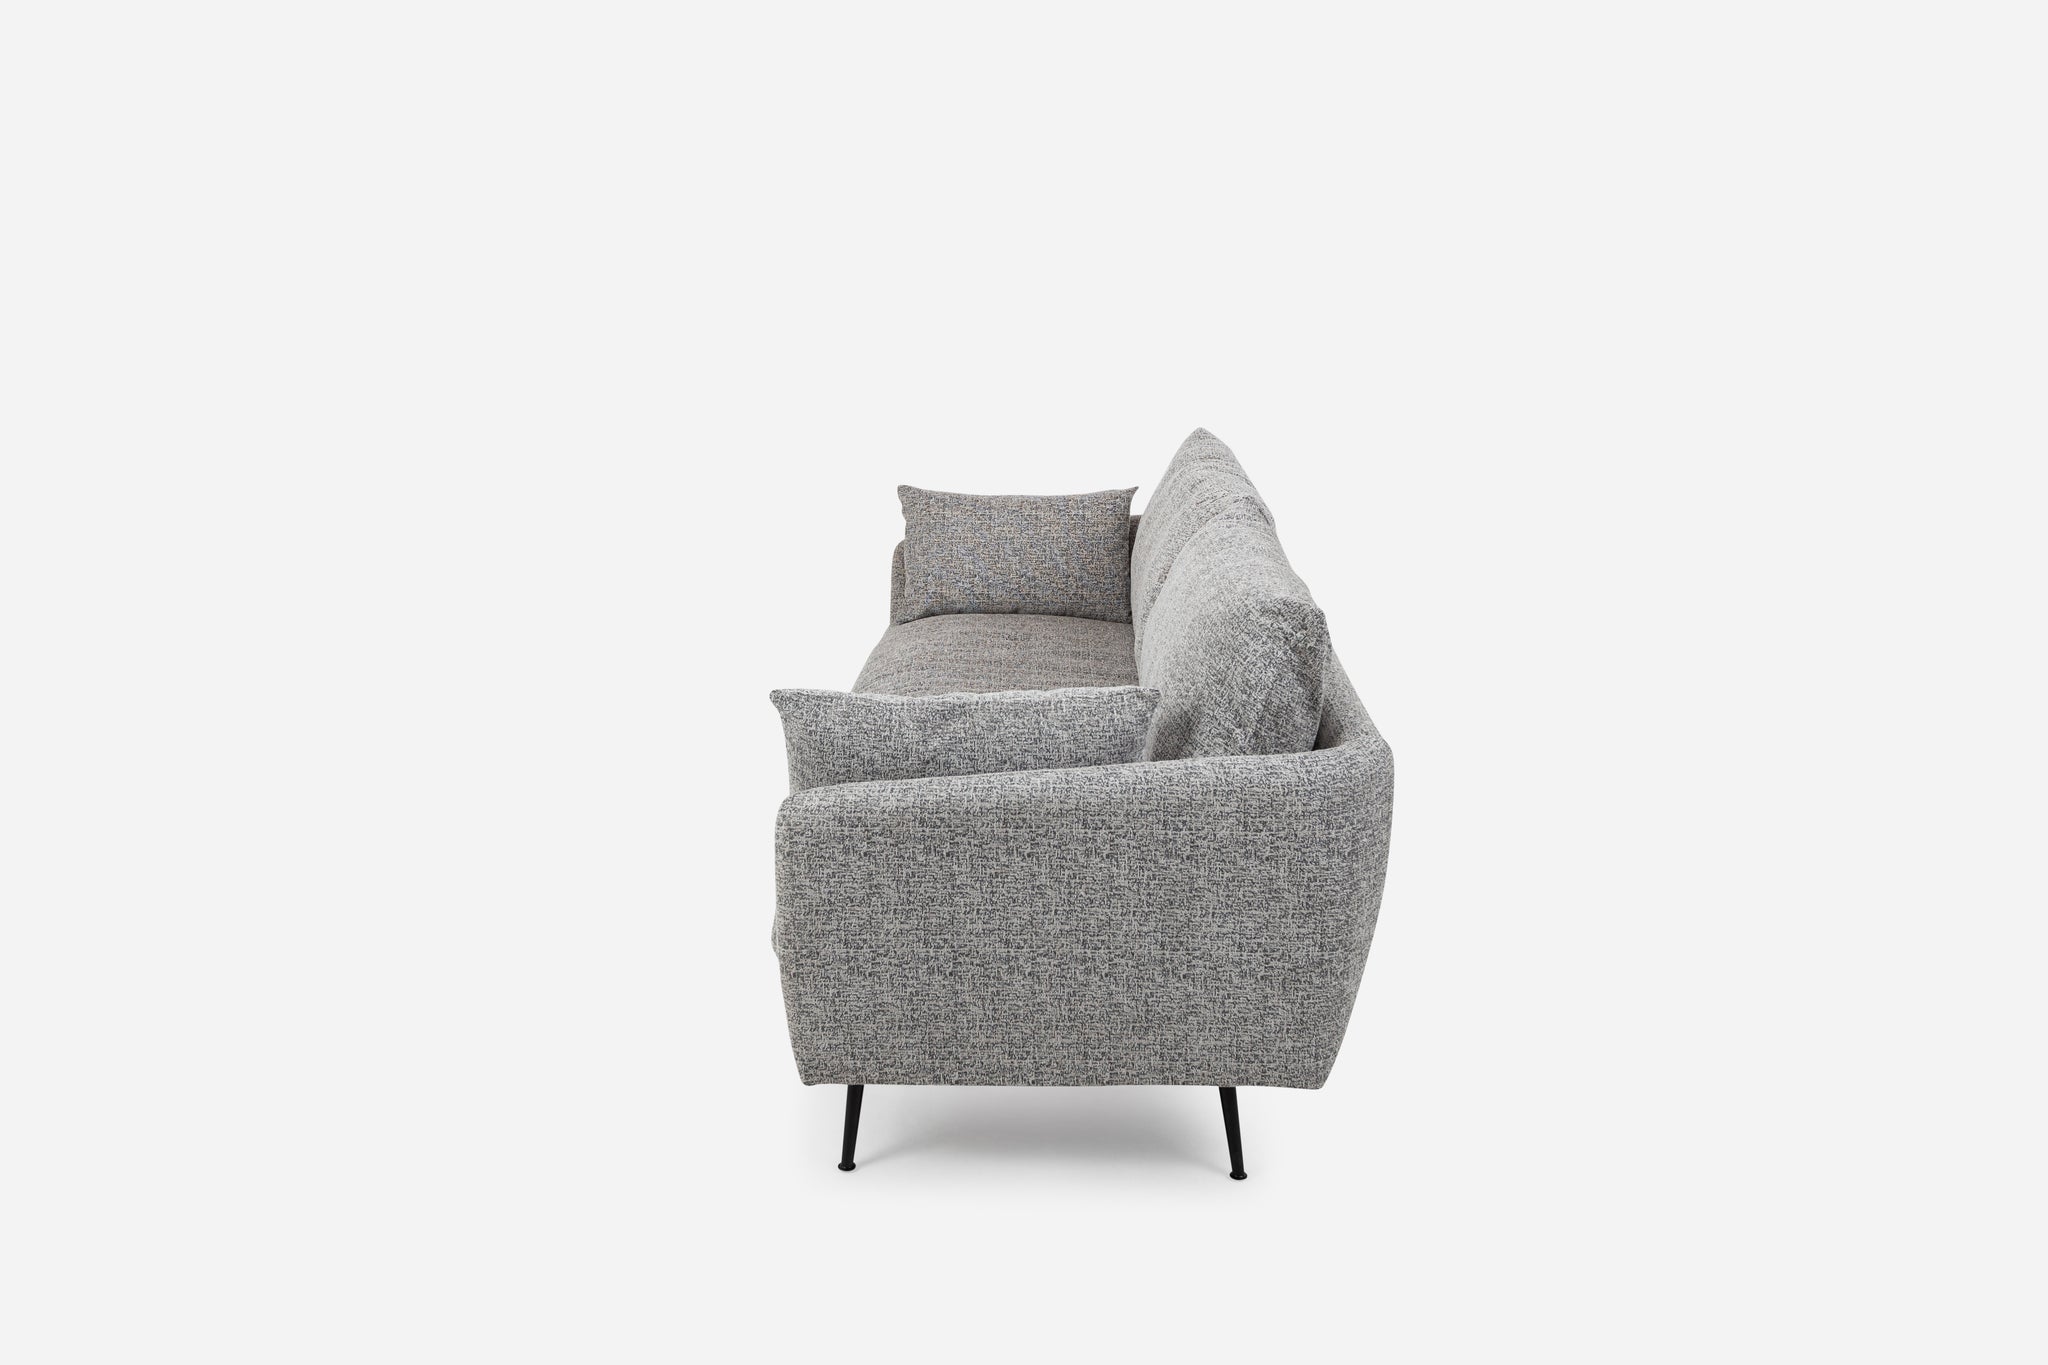 park sofa shown in grey fabric with black legs